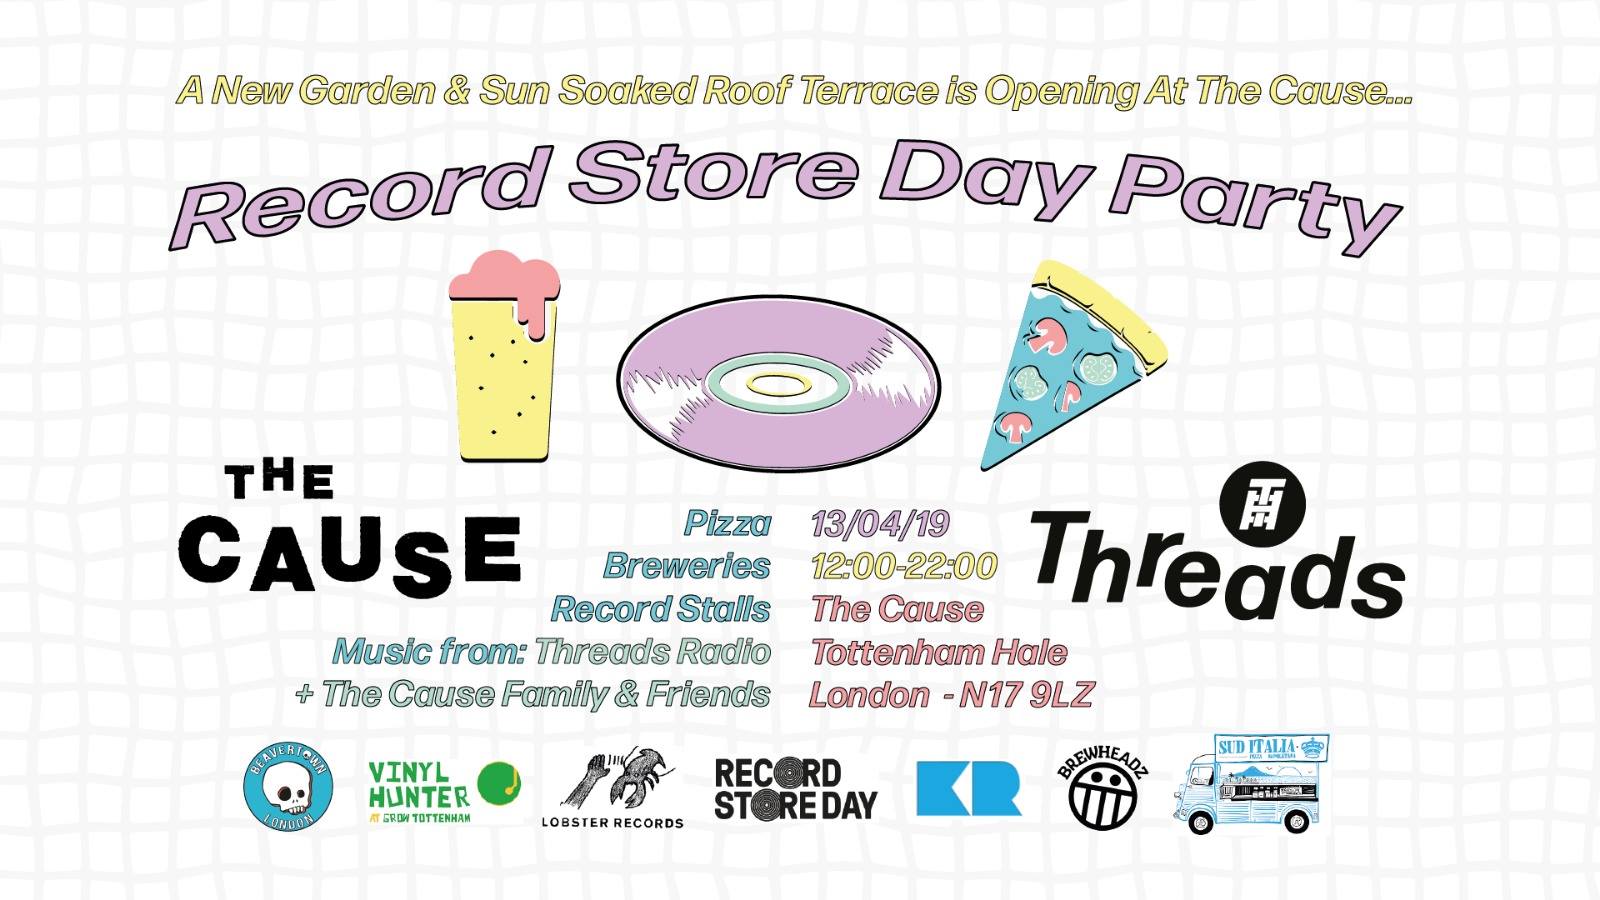 Record Store Day at The Cause (13/04/19)